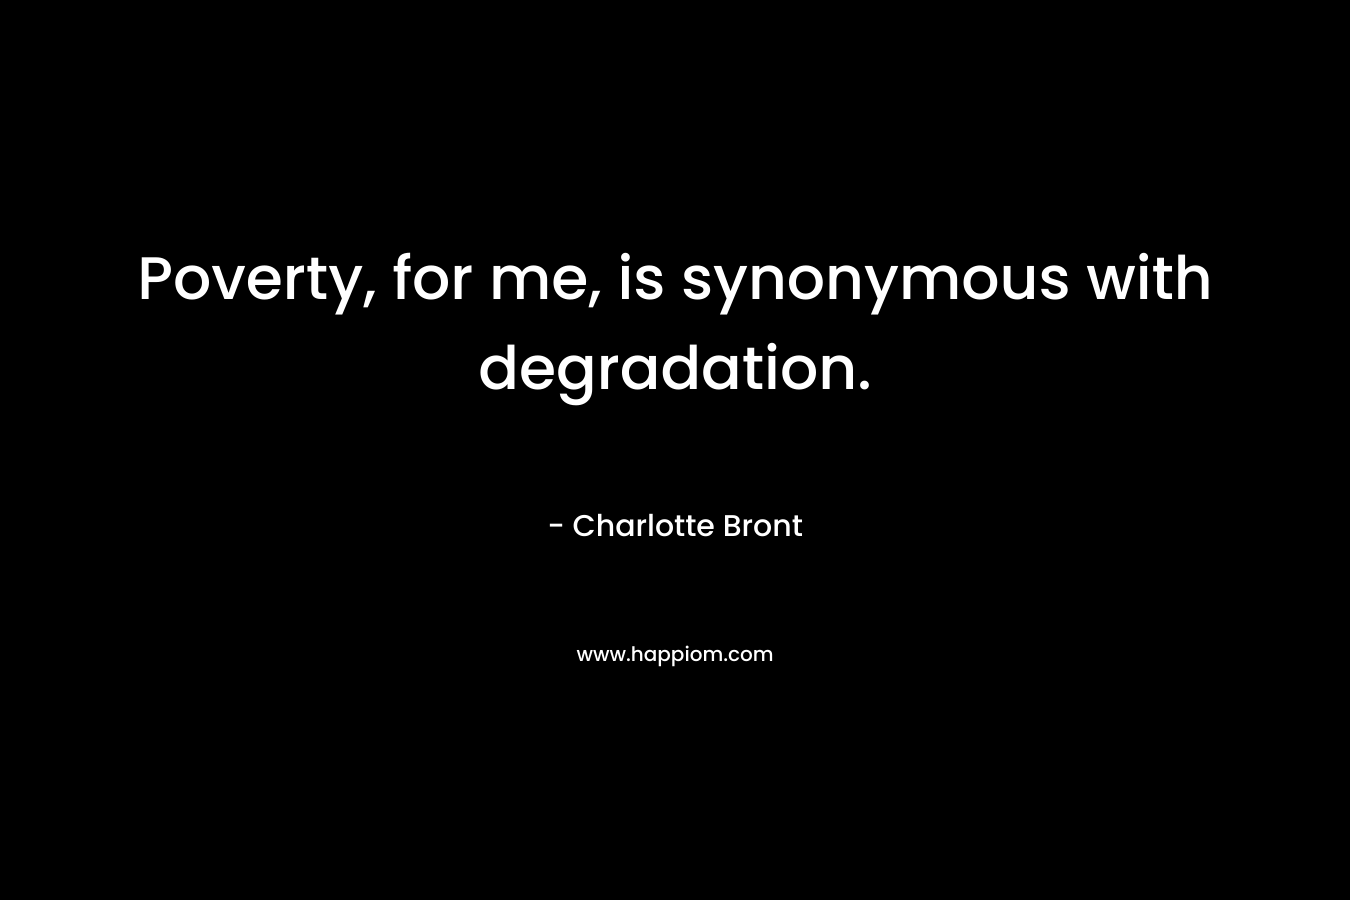 Poverty, for me, is synonymous with degradation.